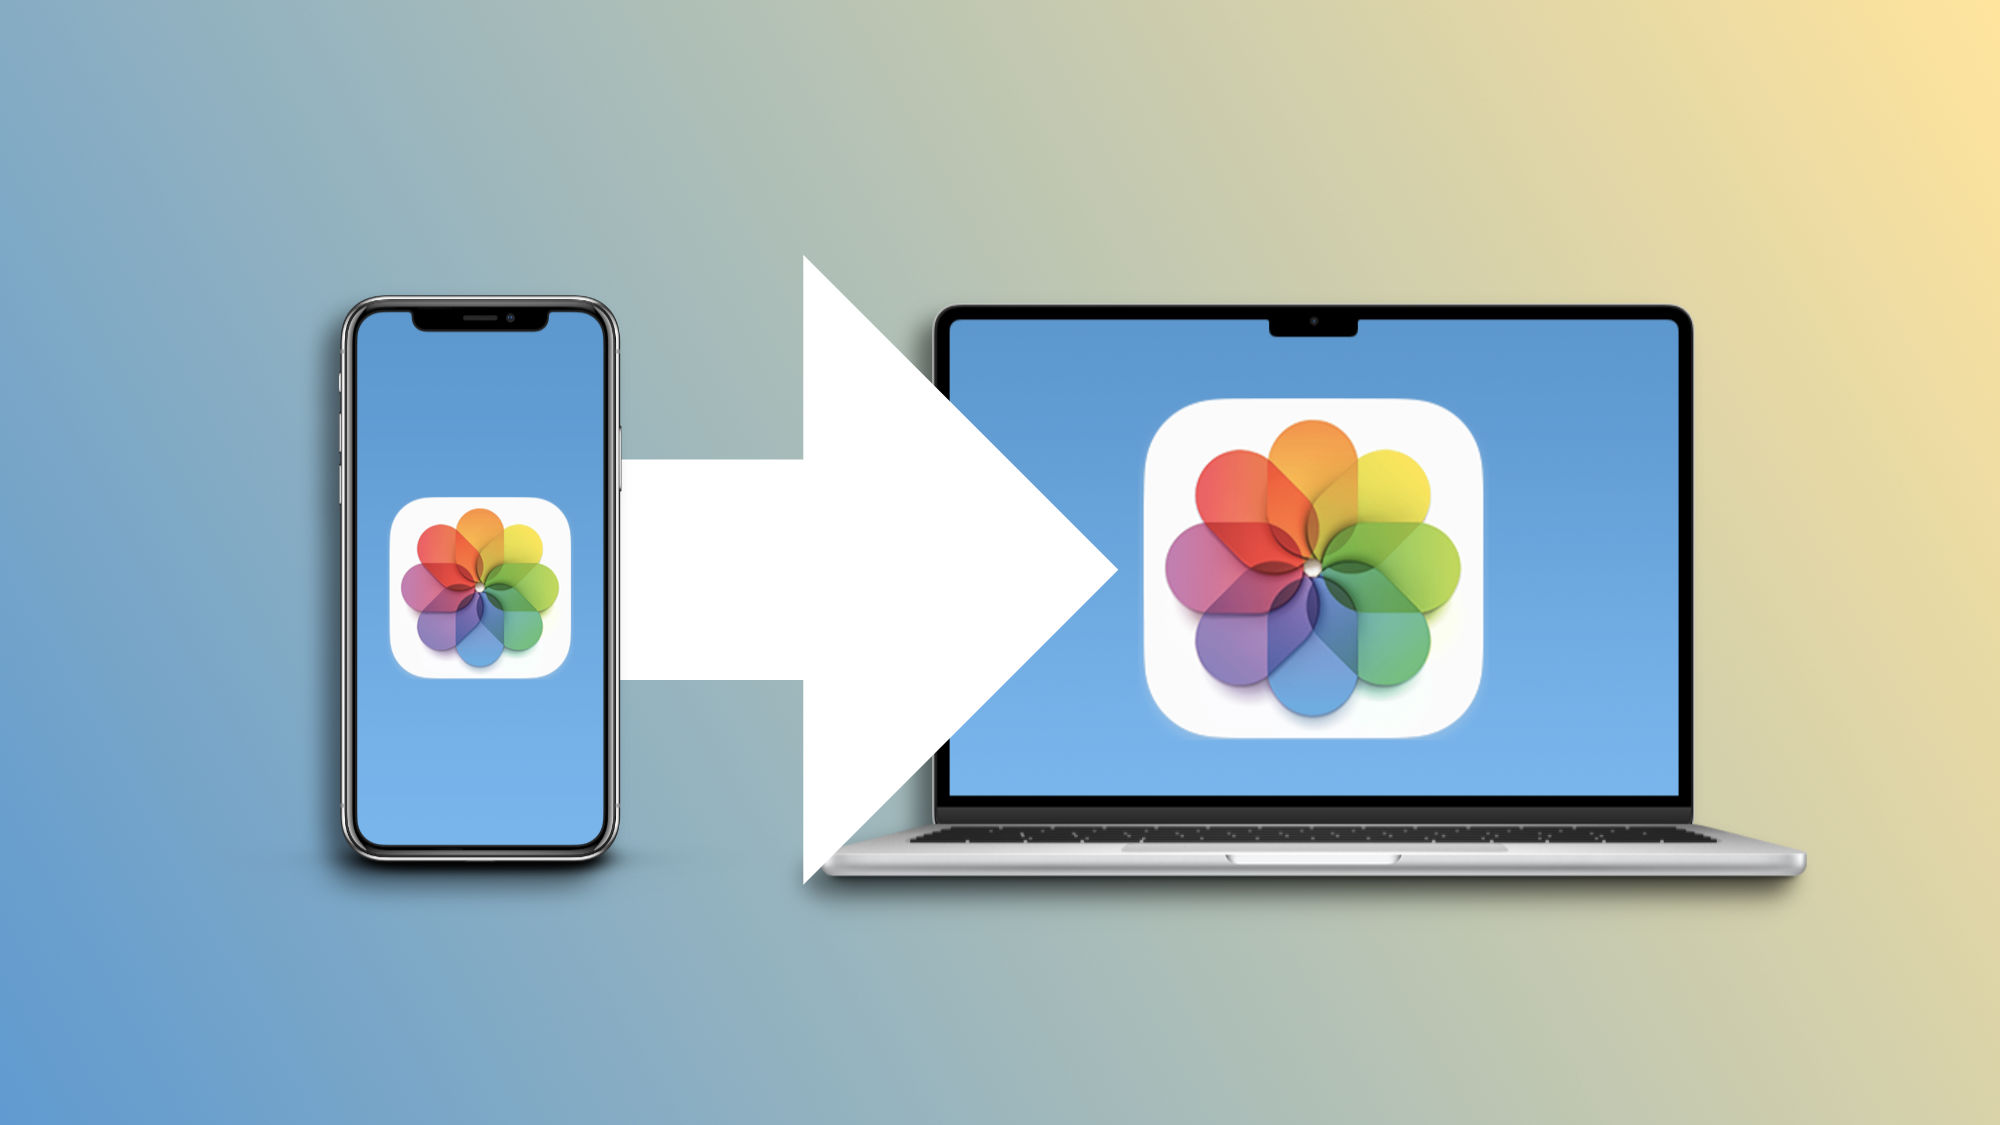 How to transfer our photos and videos from the iPhone to the computer without losing quality